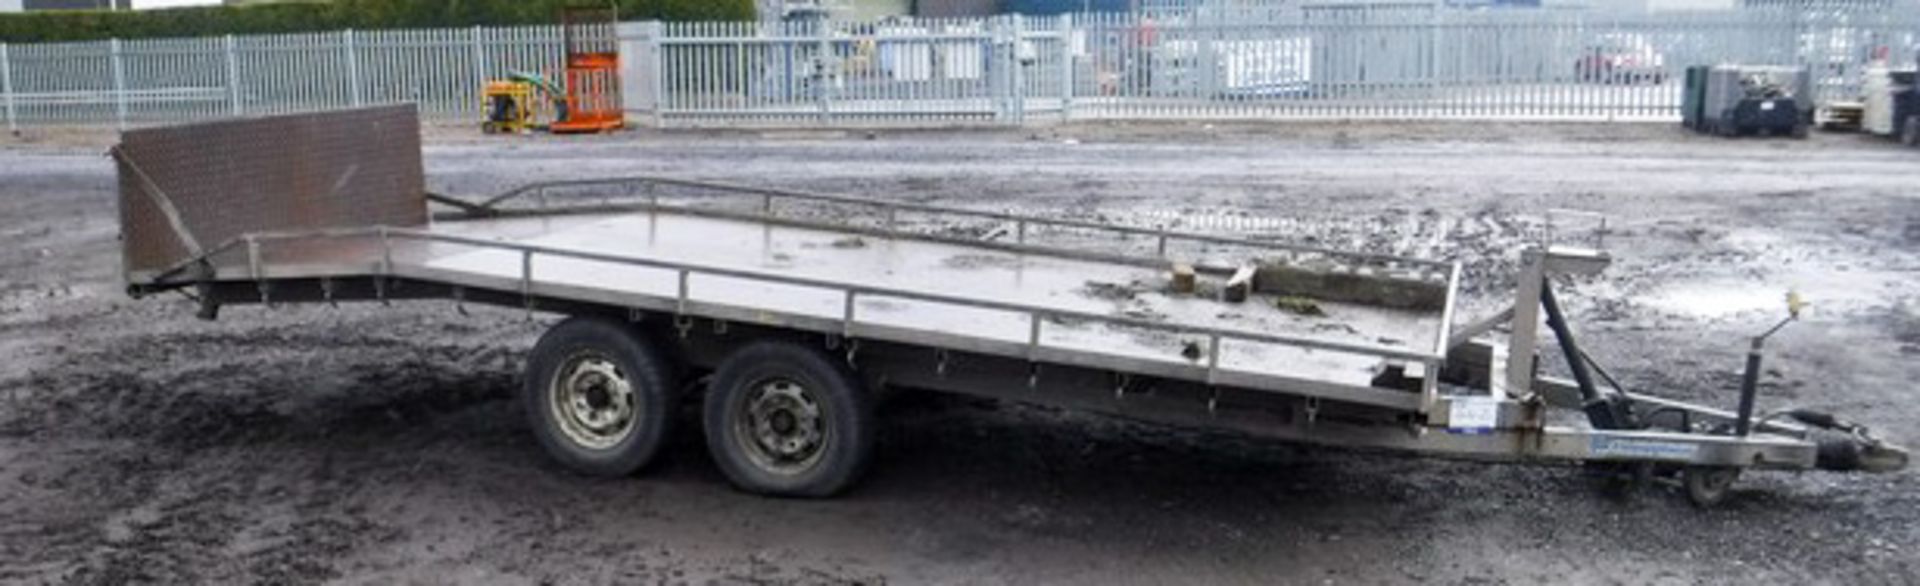 INDESPENSION 16' x 6' twin axle tilt/tipping trailer c/w loading ramp. Vin G020427.